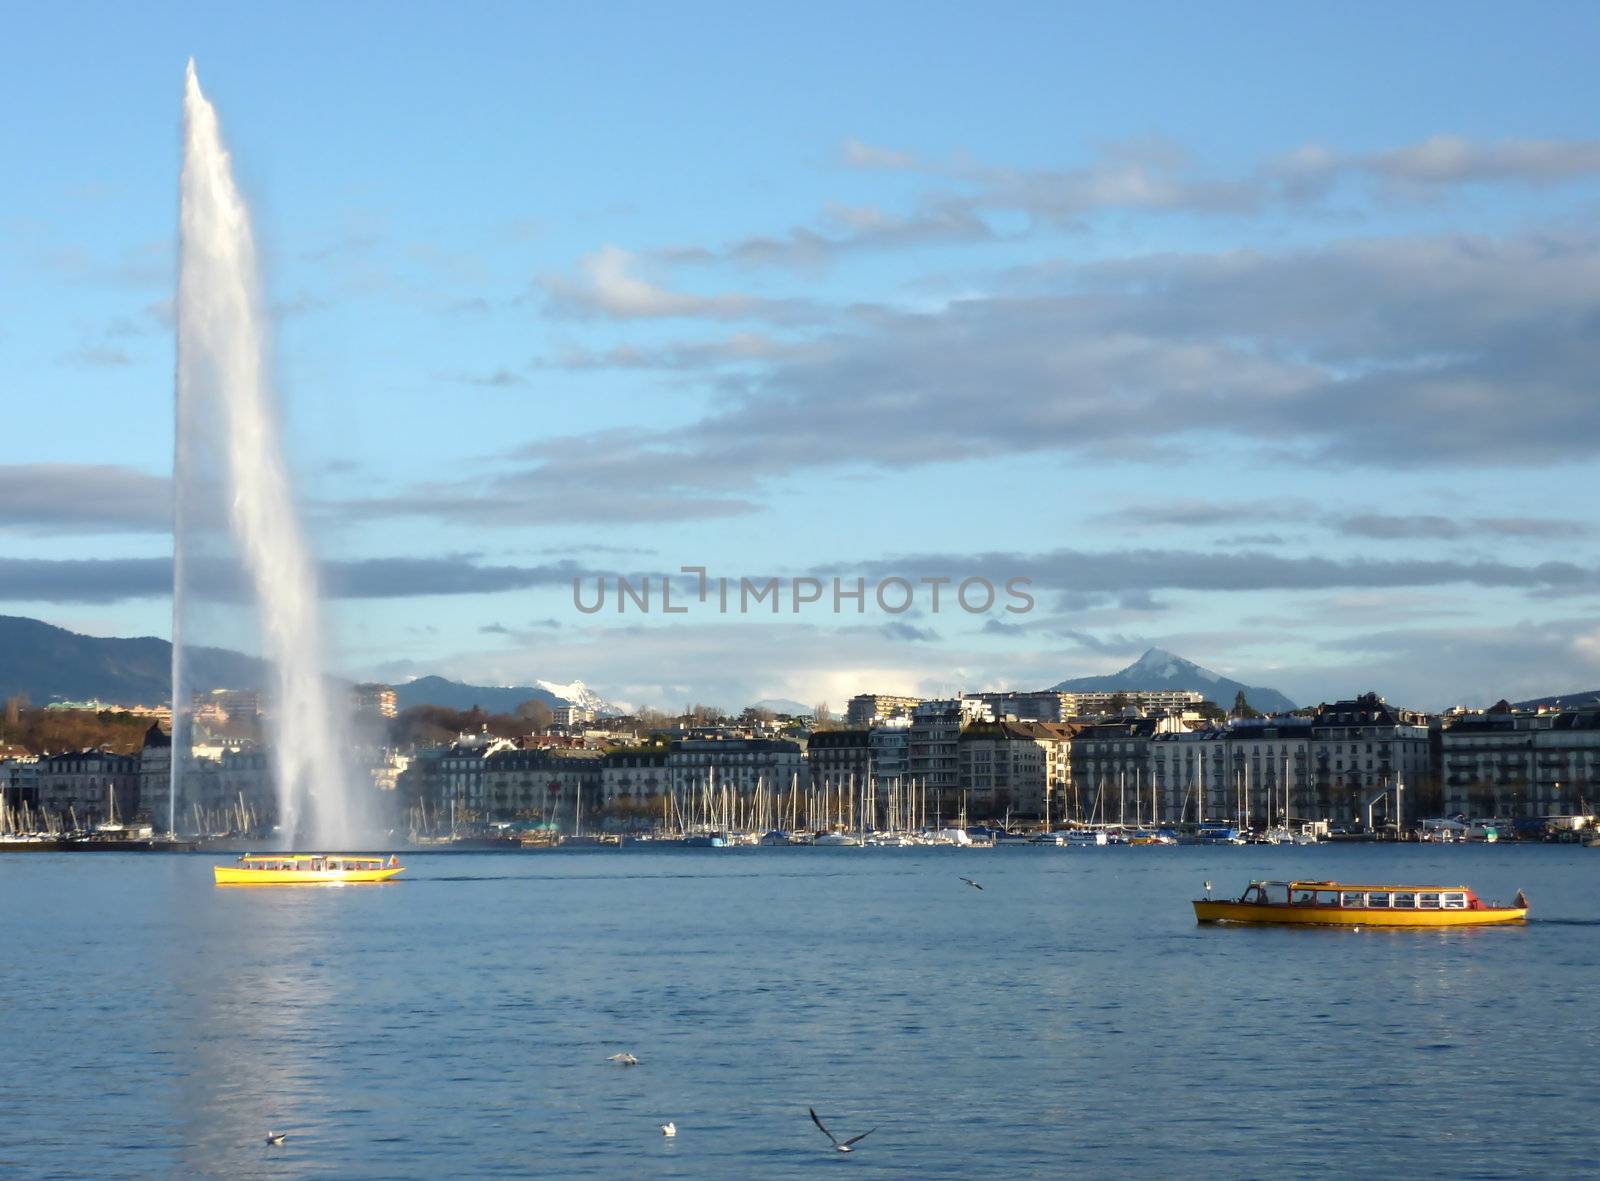 View of the fountain of Geneva lake with a small yellow boat aside